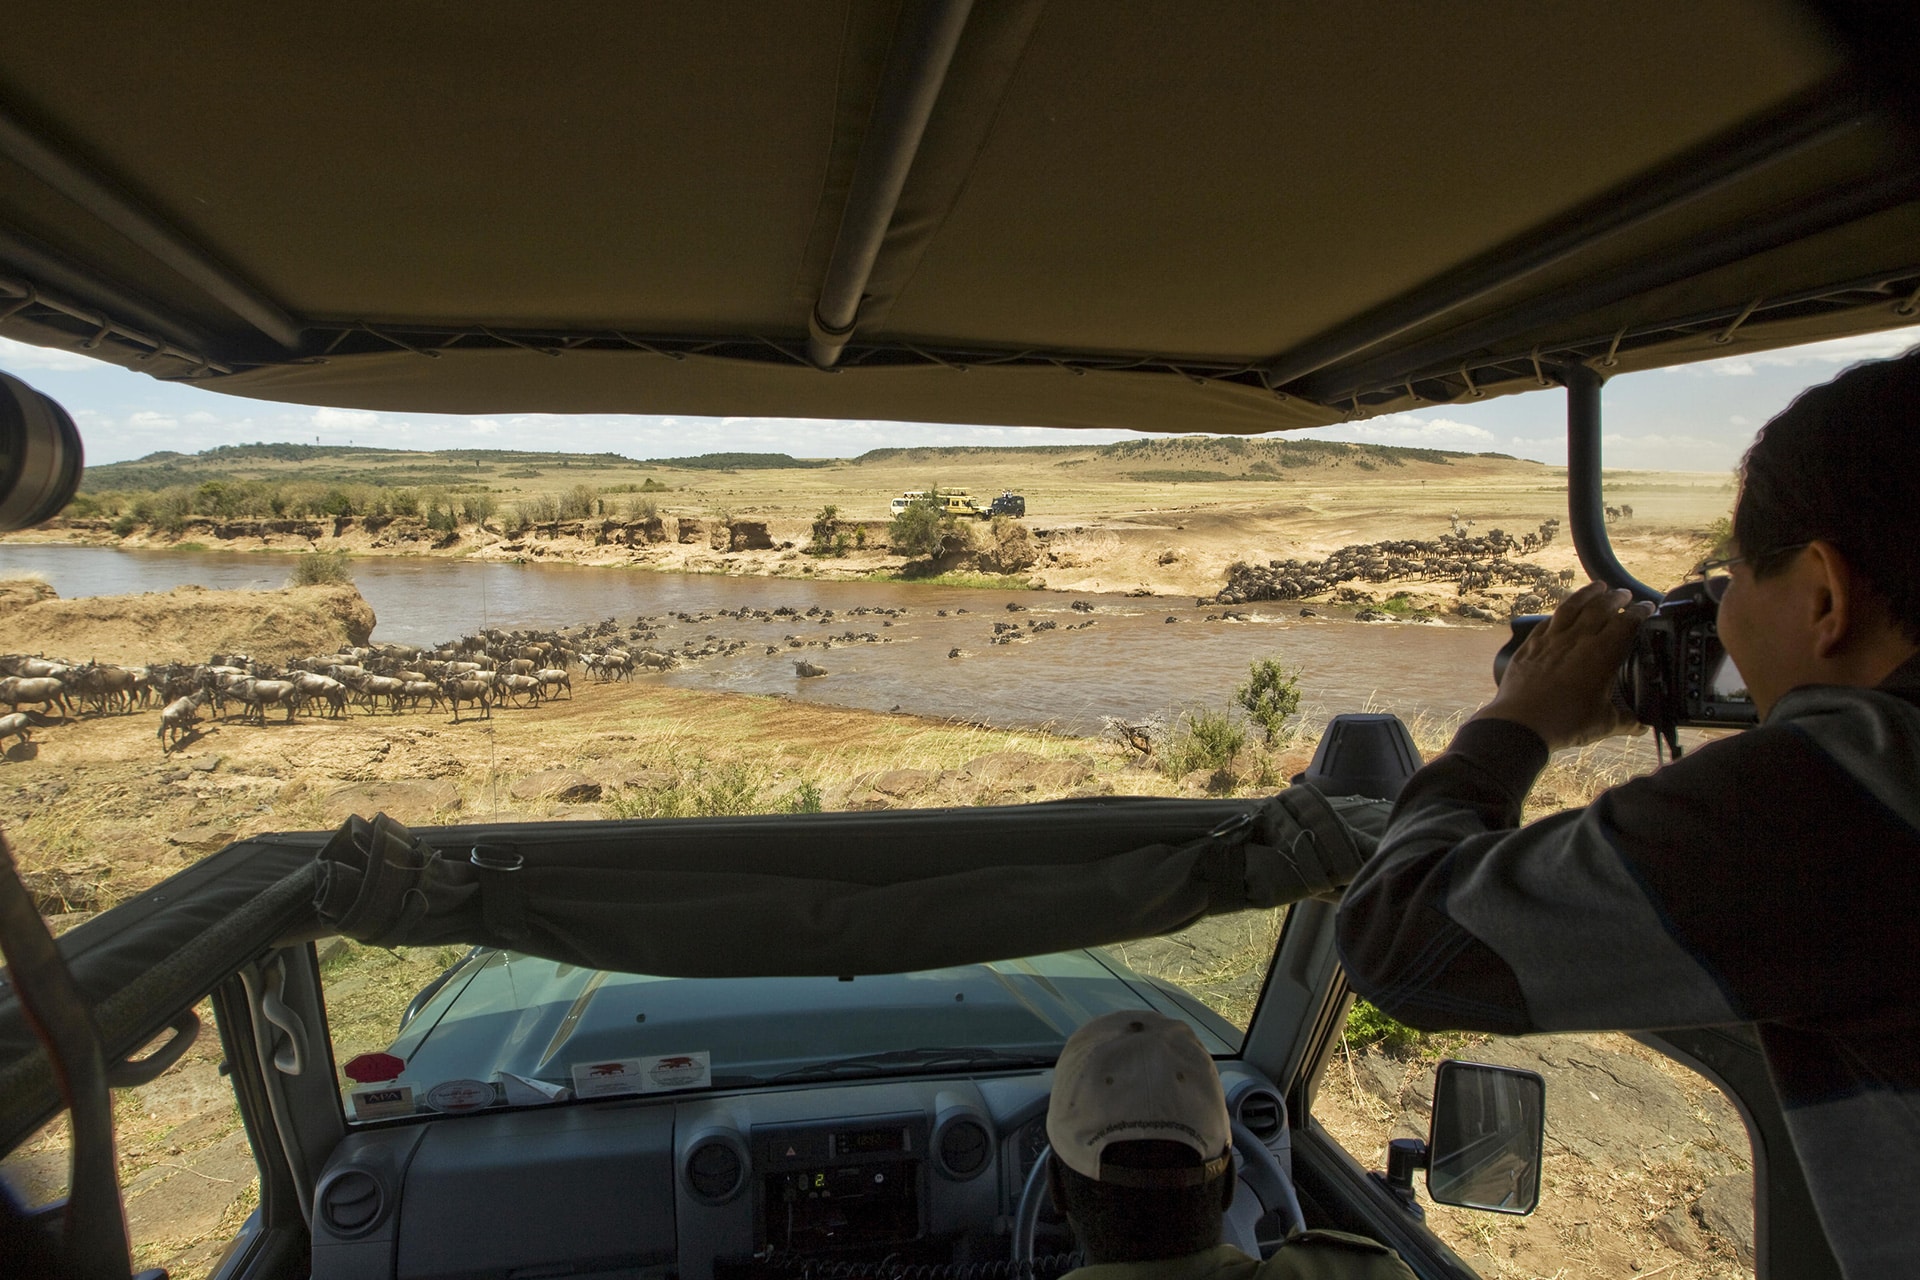 Witness the Great Wildebeest Migration while staying at one of the masai mara safari lodges